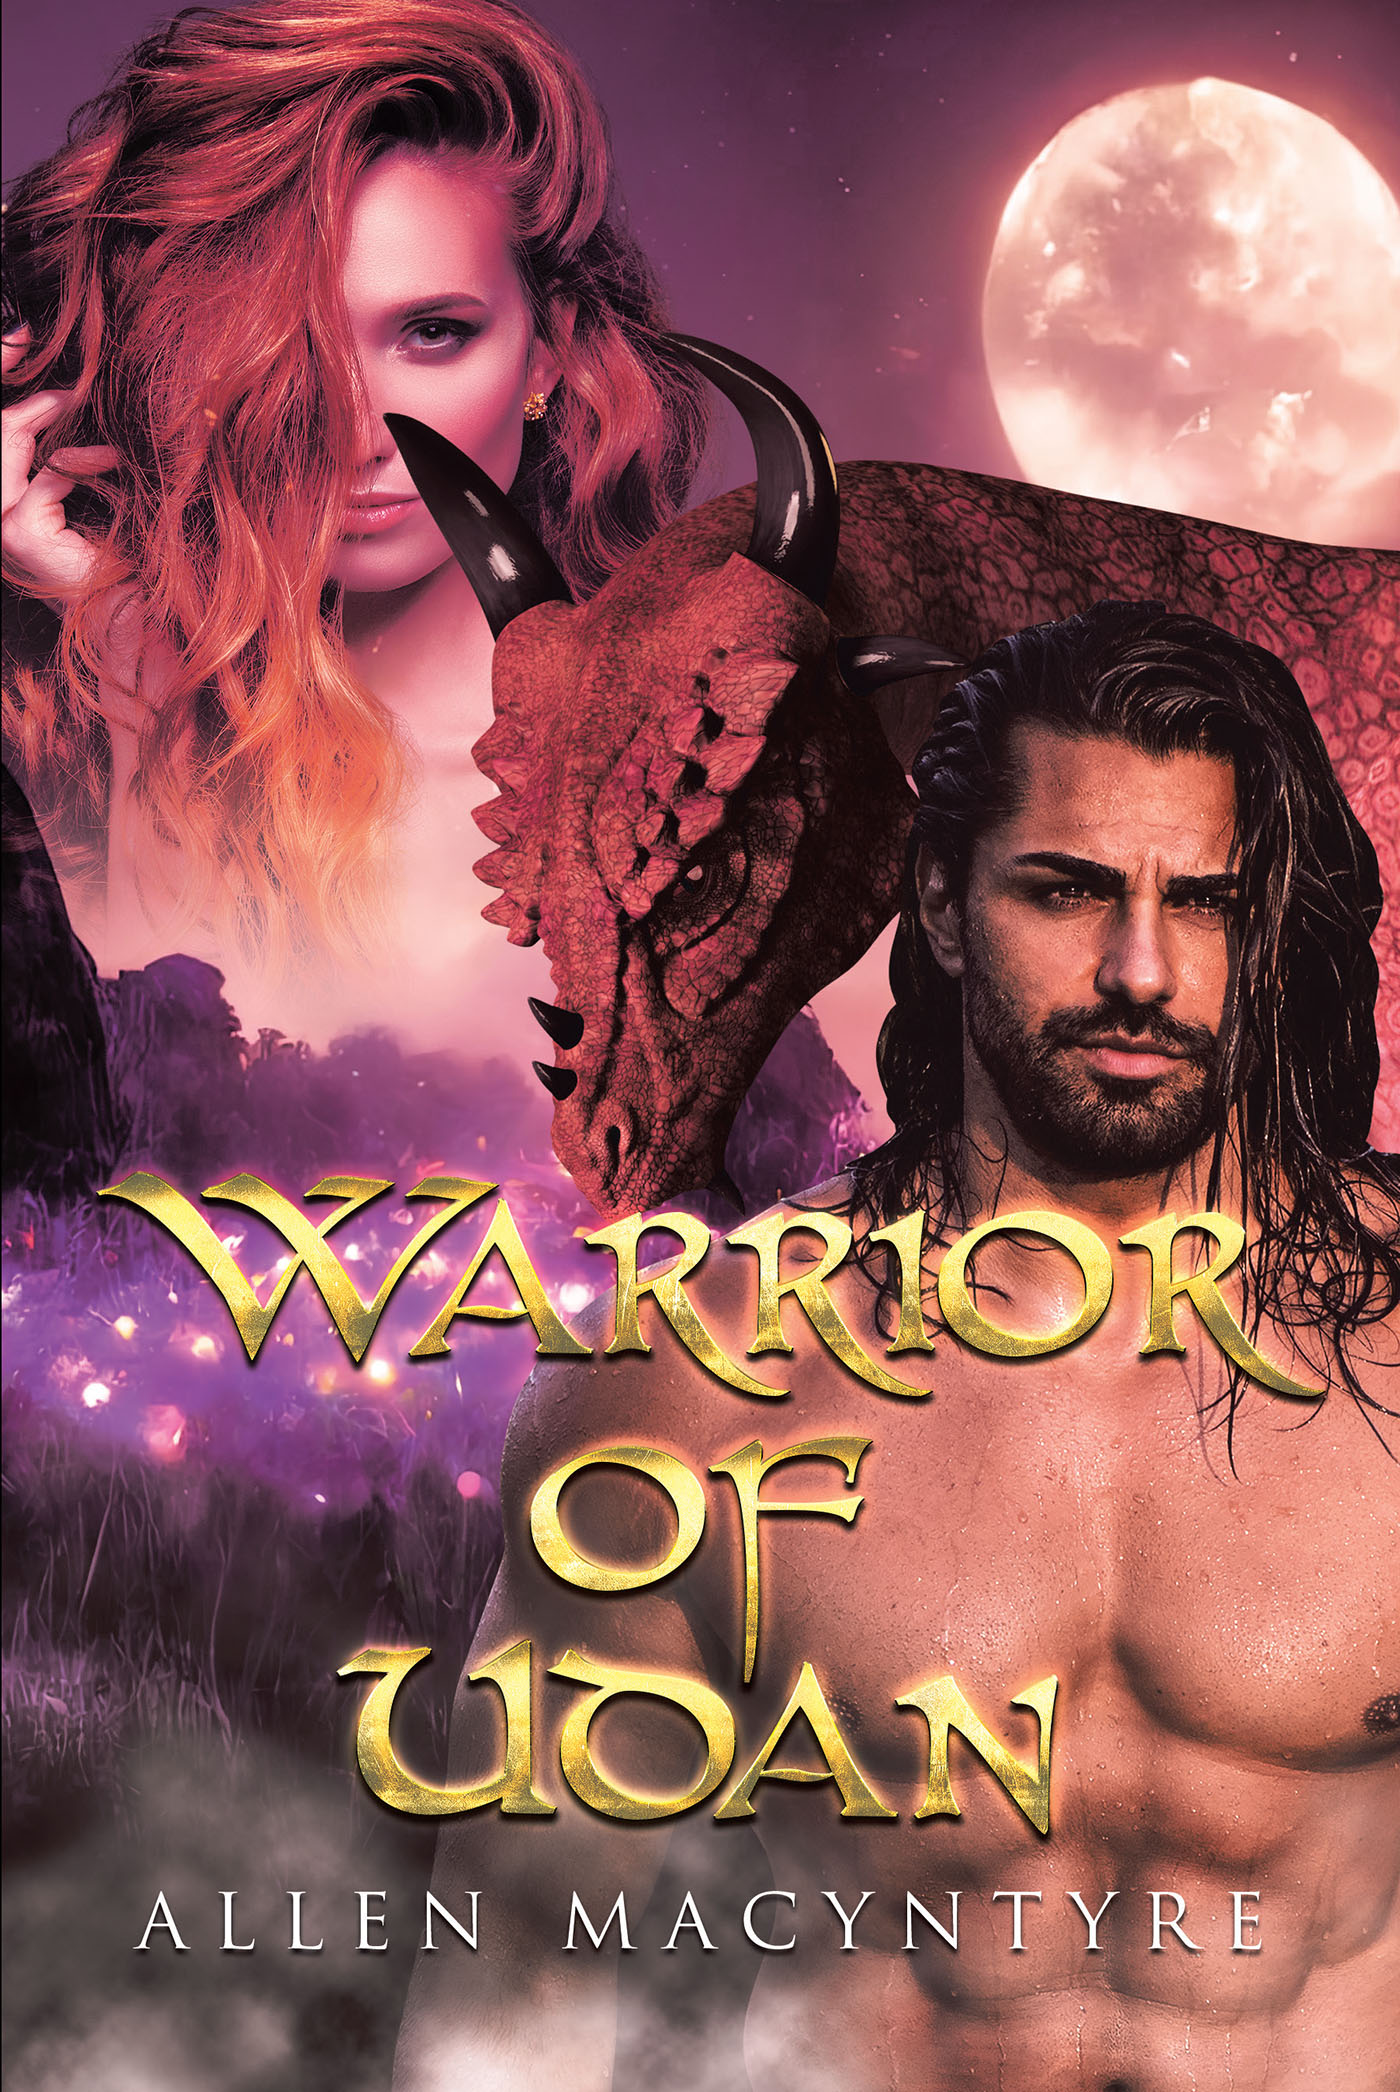 Allen Macyntyre’s New Book, "Warrior of Udan," is an Alluring Novel About a Young Man Who is Unknowingly Thrust Into an Unfamiliar and Dangerous World